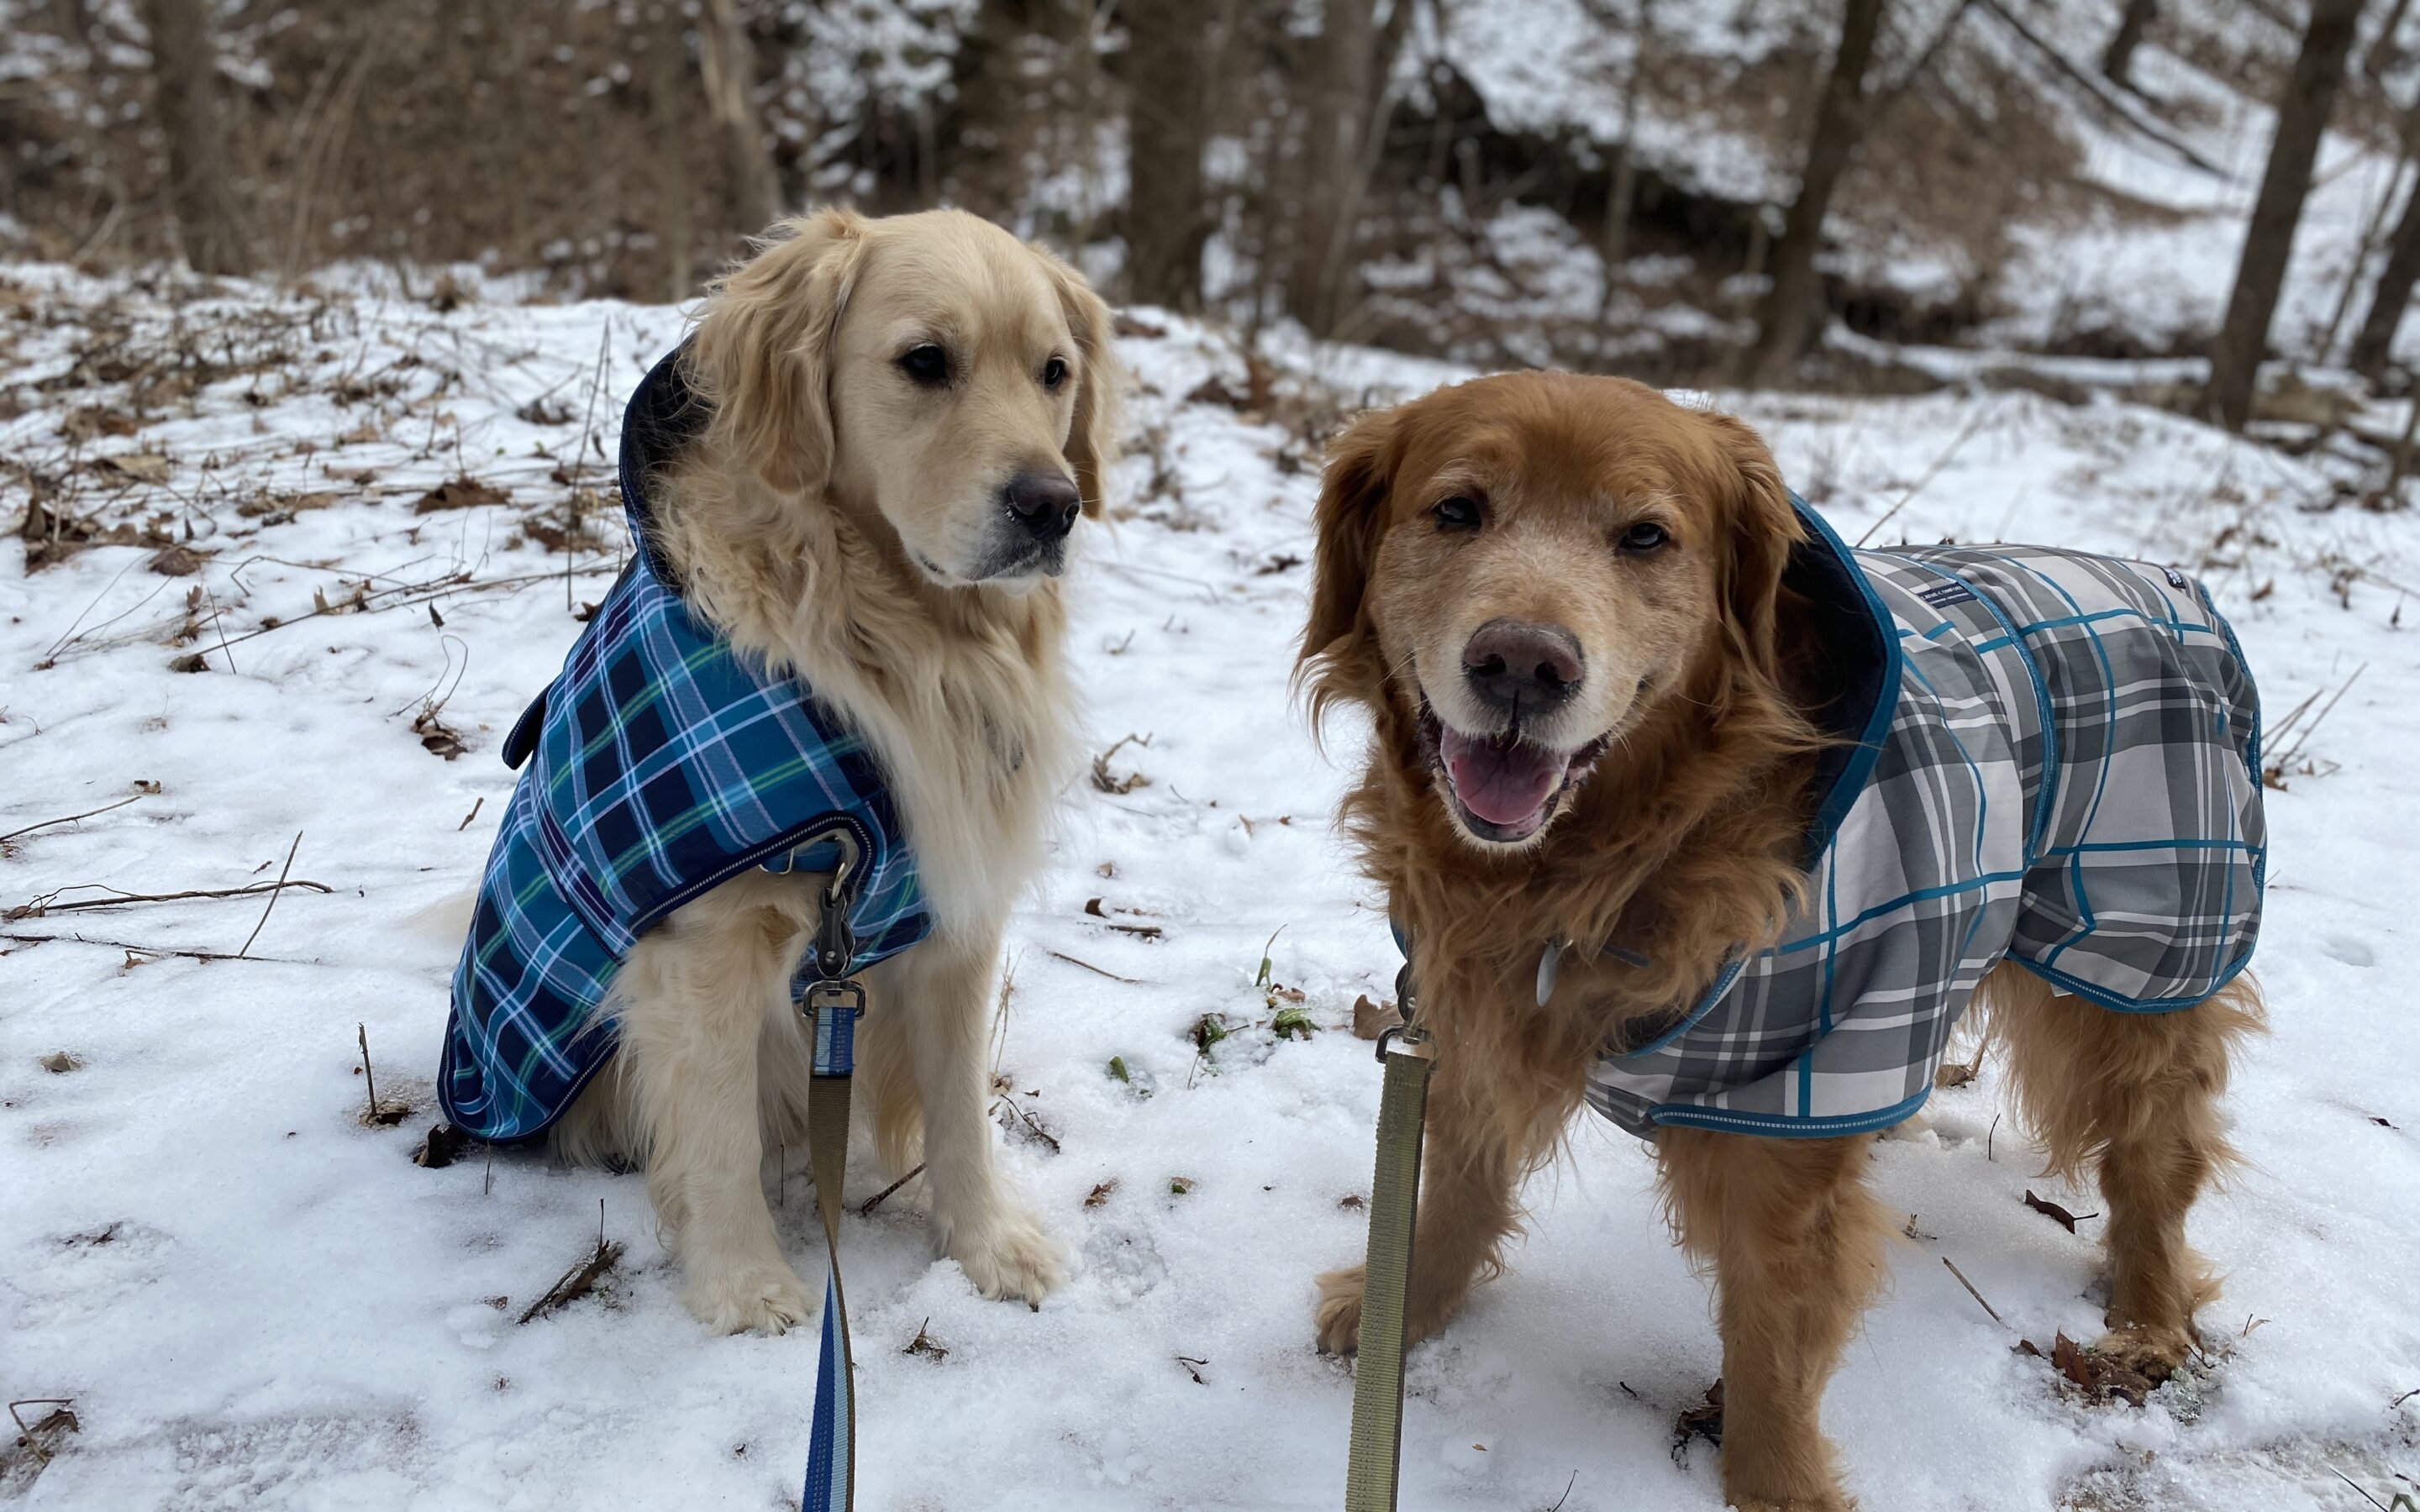 Let’s WOOF about dogs wearing coats.